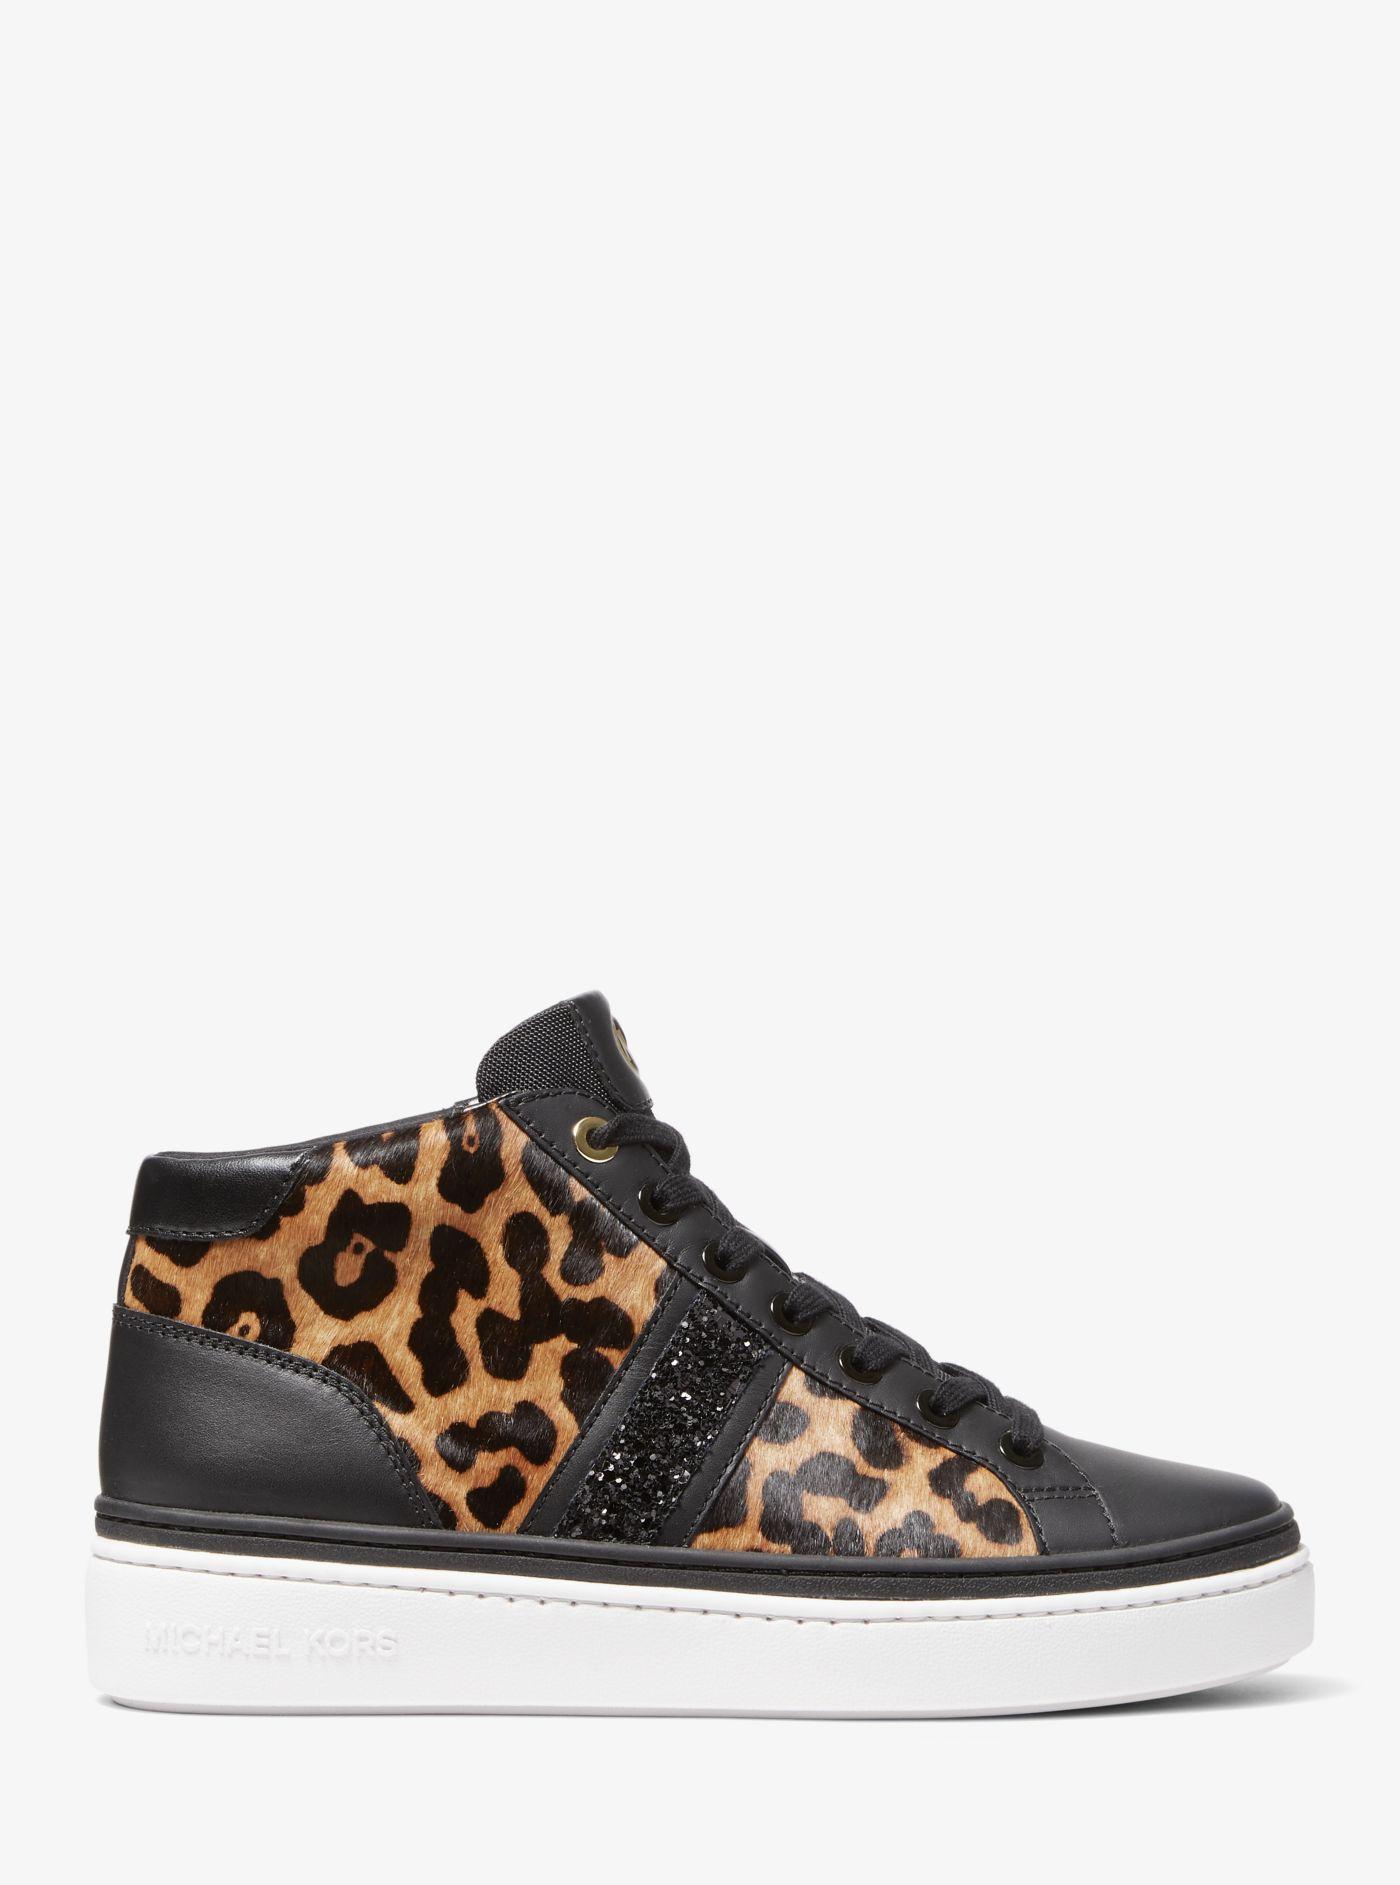 Michael Kors Chapman Embellished Leopard Print Calf Hair And Leather  High-top Sneaker | Lyst